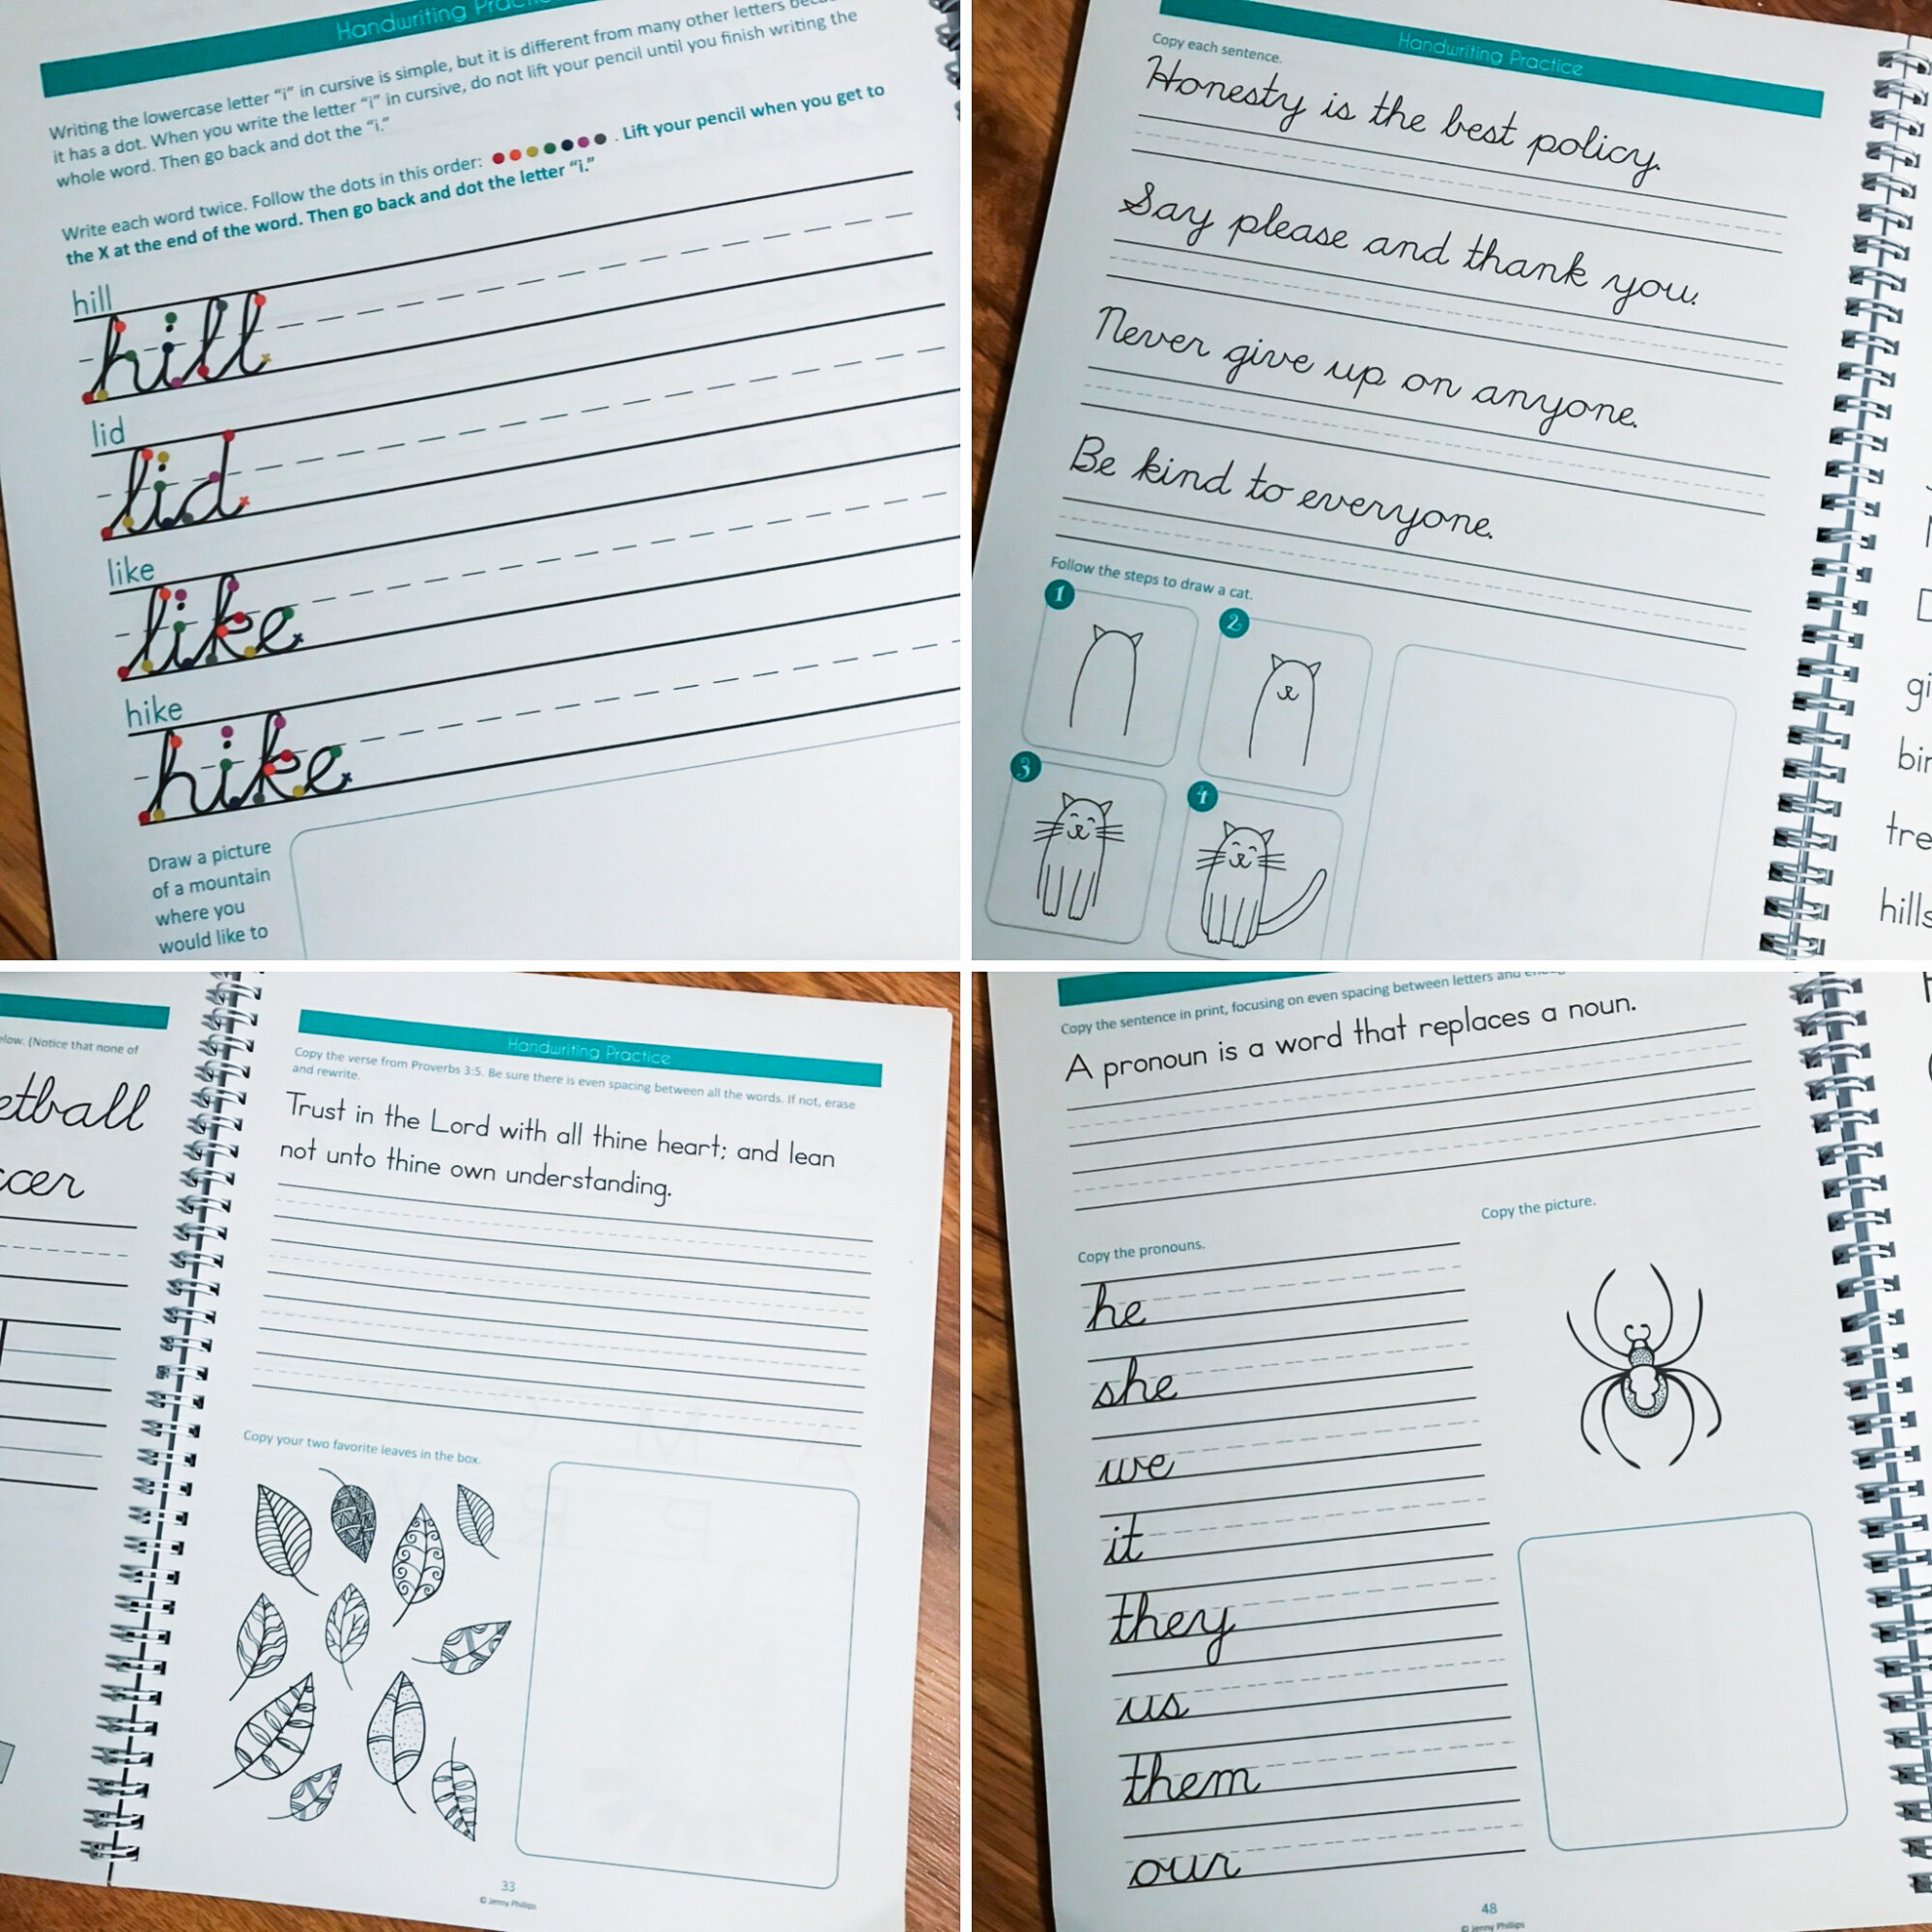 the good and the beautiful handwriting level 4 homeschool curriculum with four examples